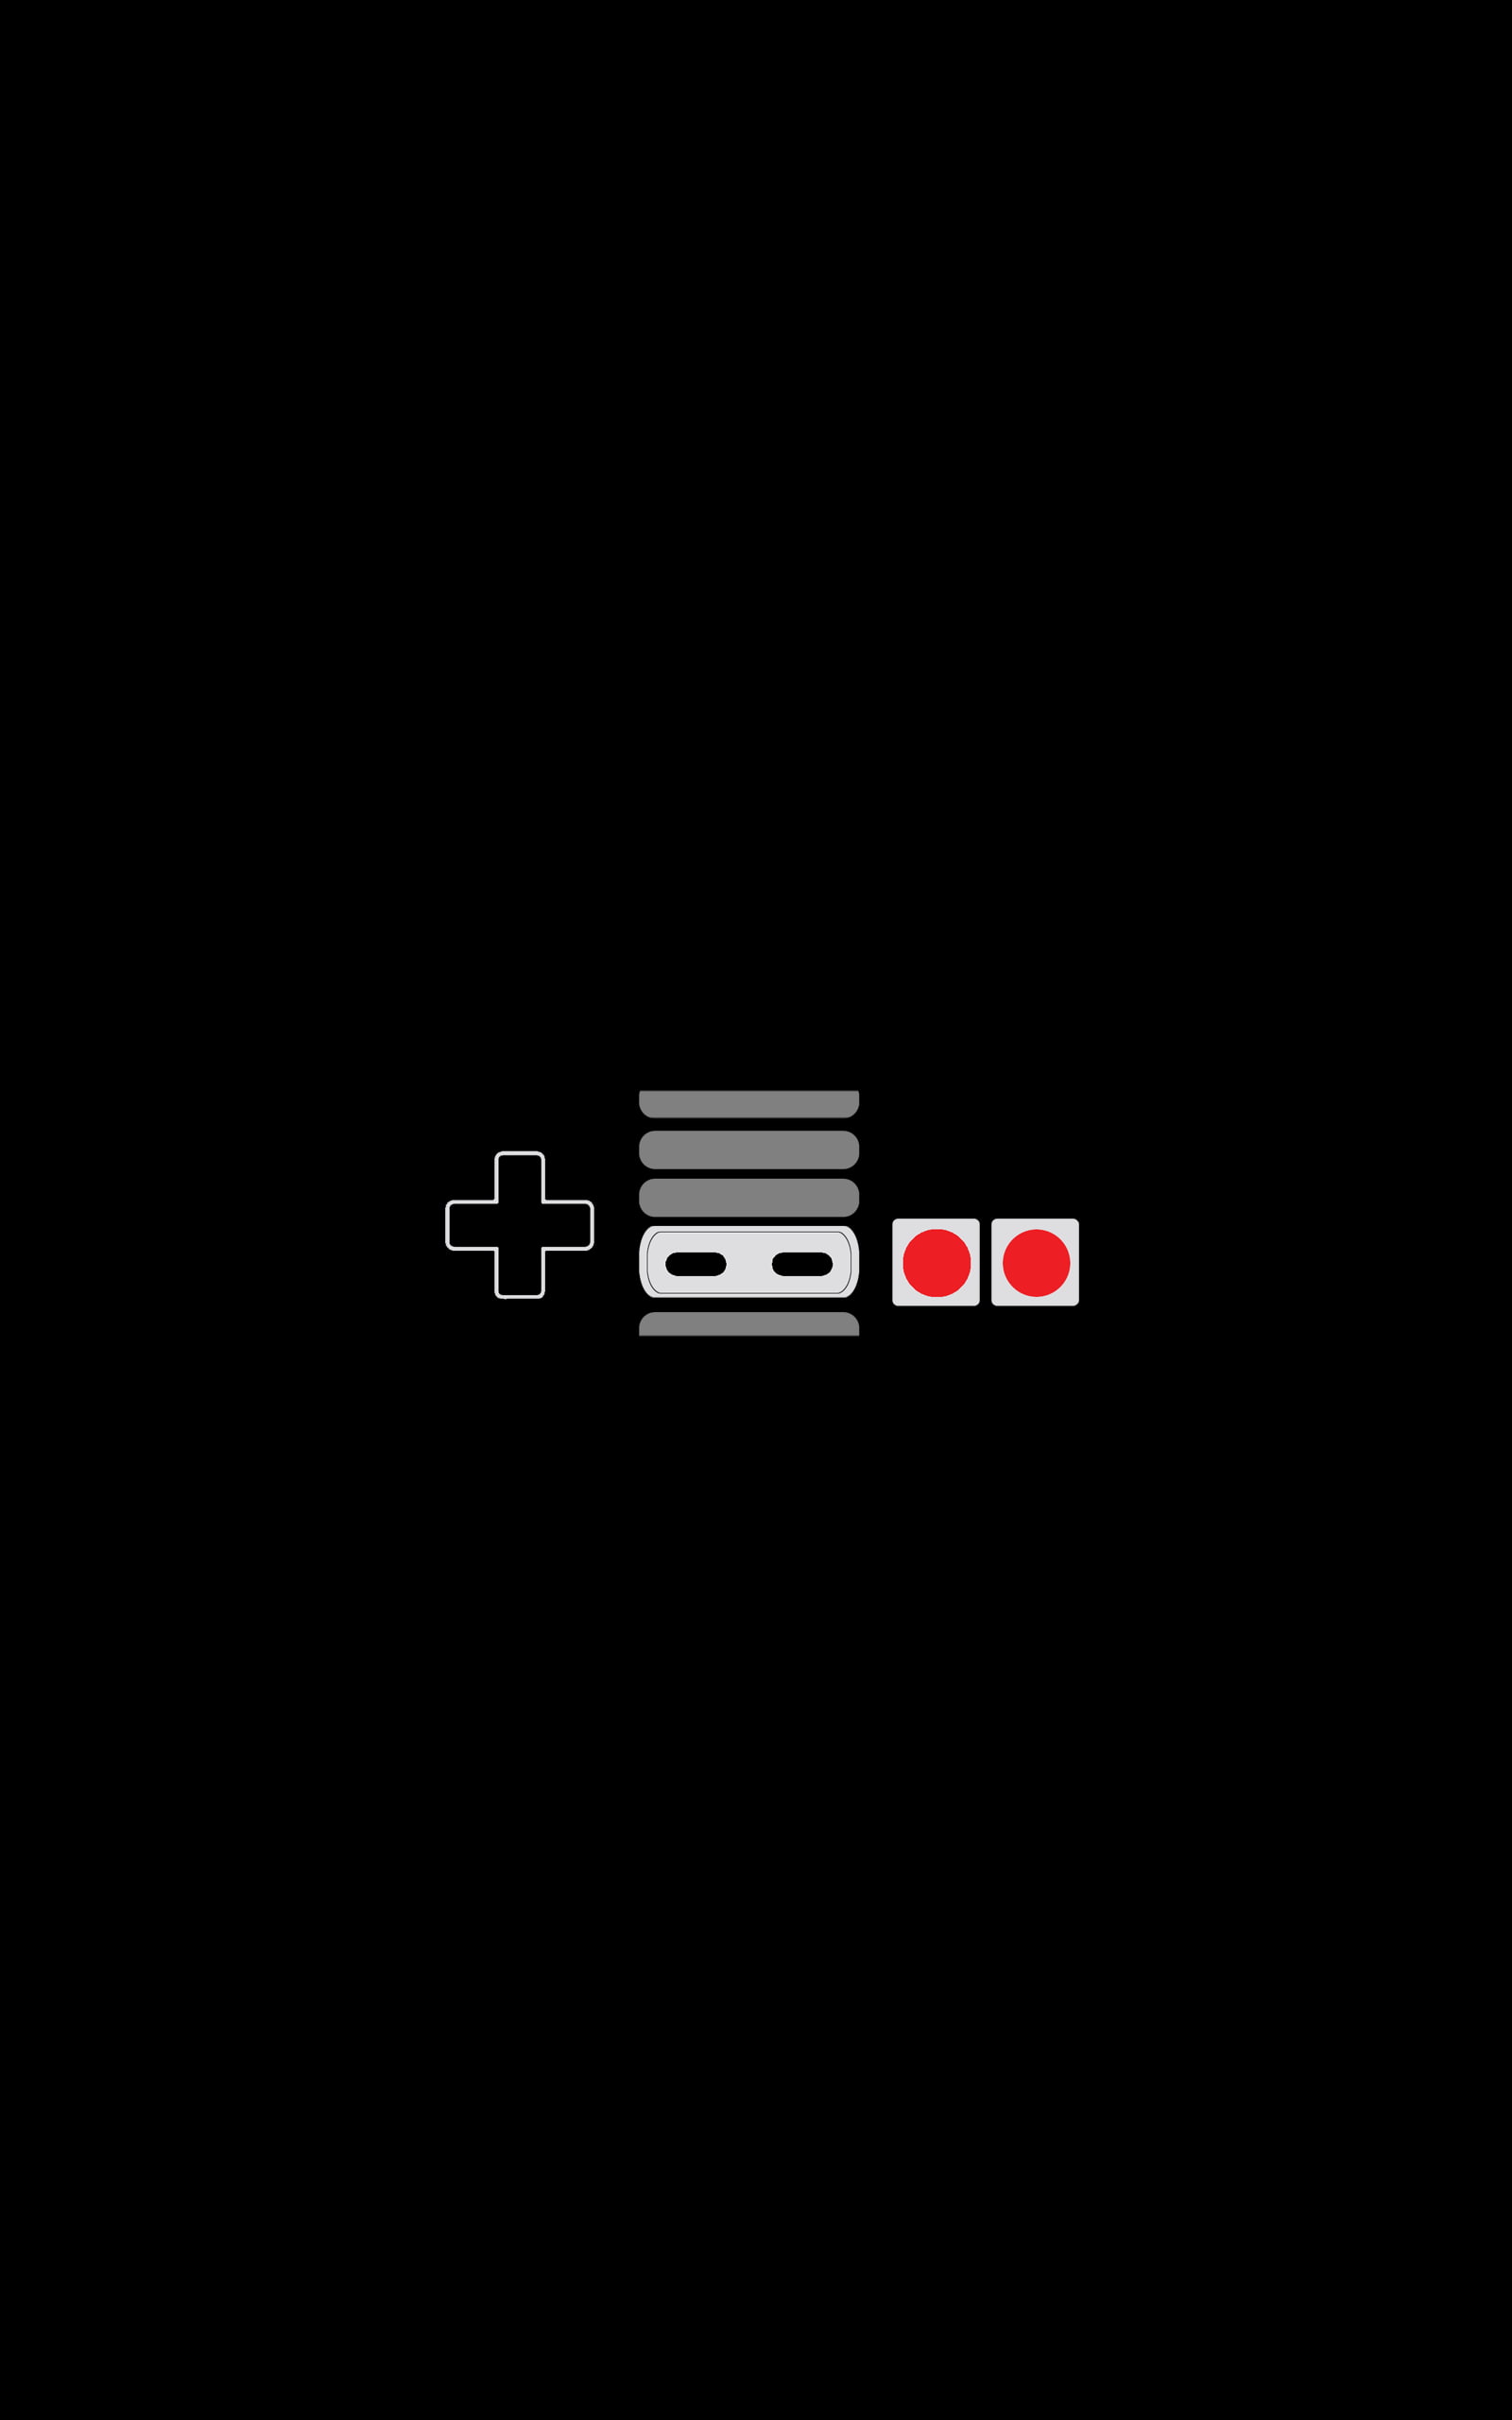 Nintendo Entertainment System, controllers, minimalism, video games